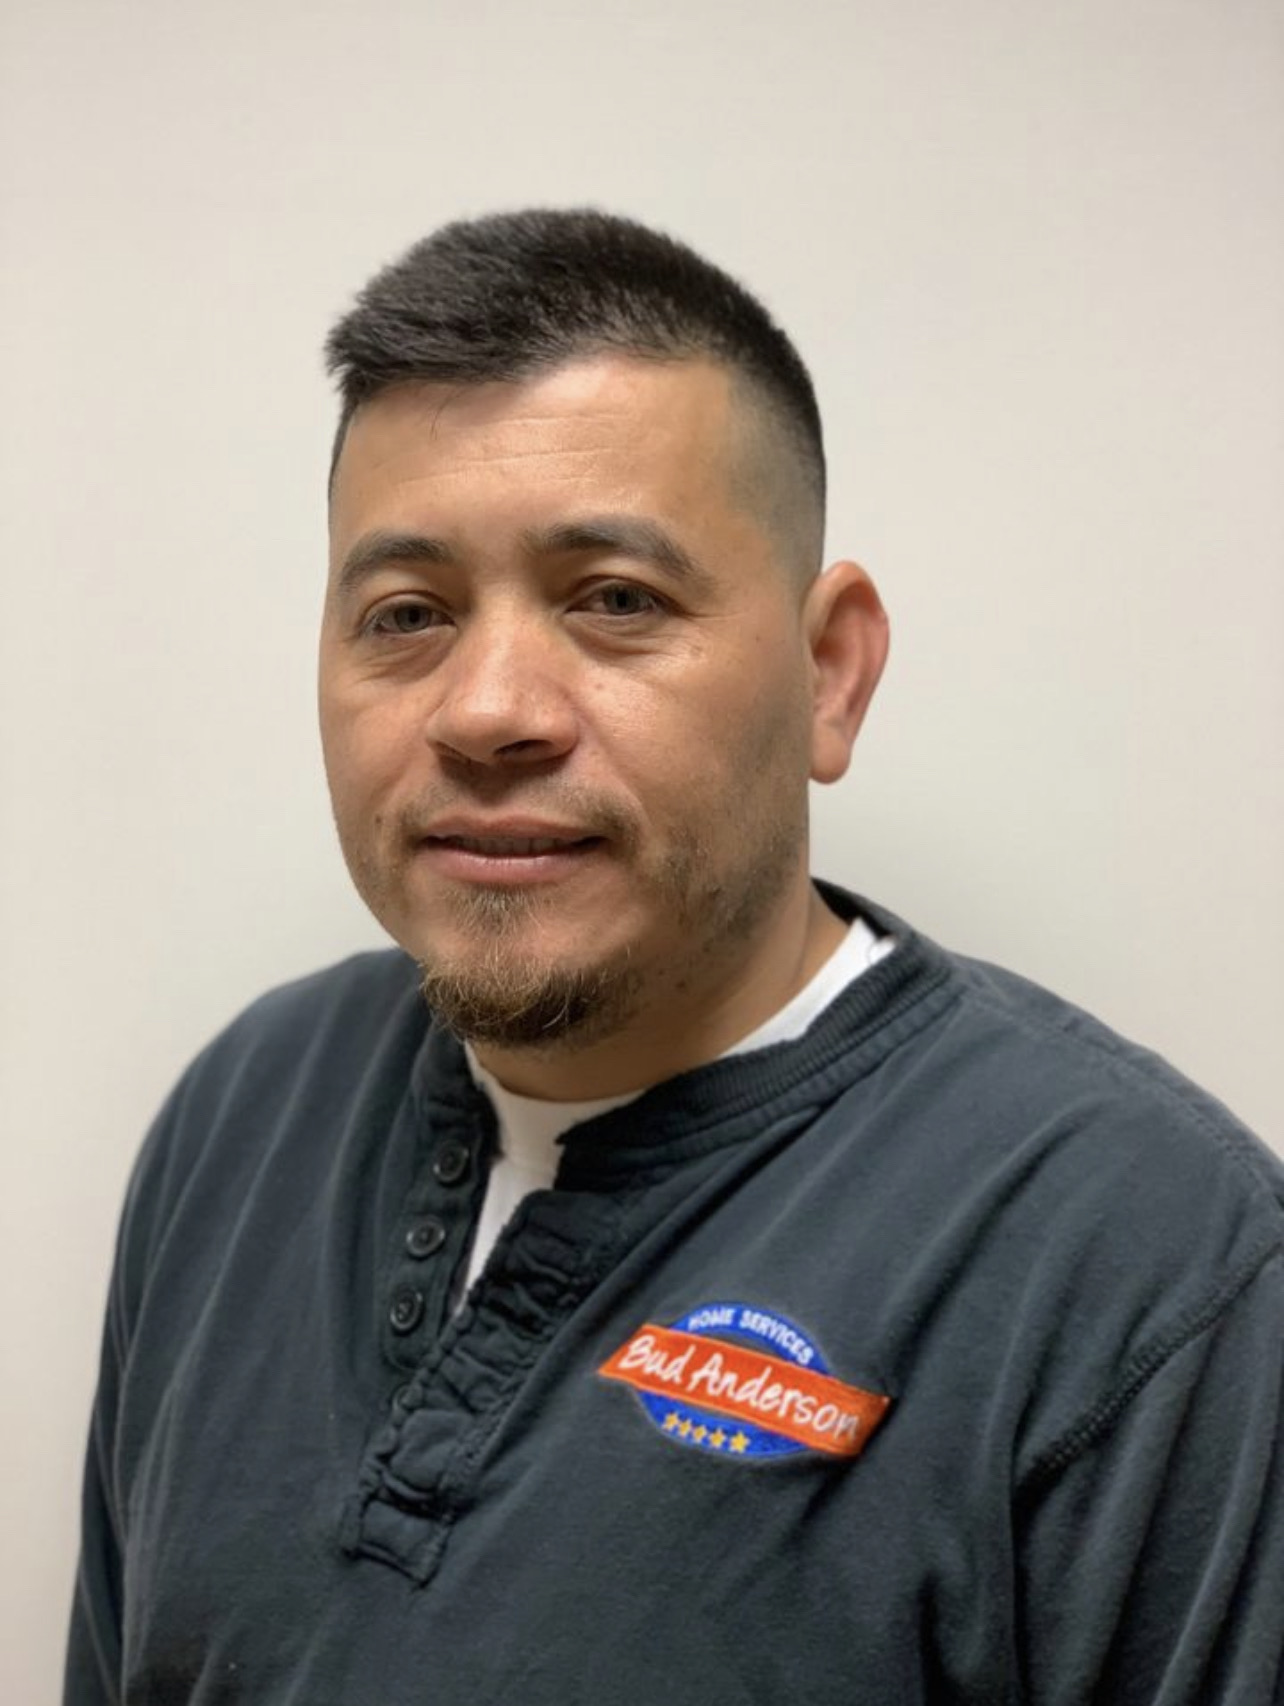 Jose M, Bud Anderson Employee of the Month - HVAC Near Me and Arkansas HVAC Careers